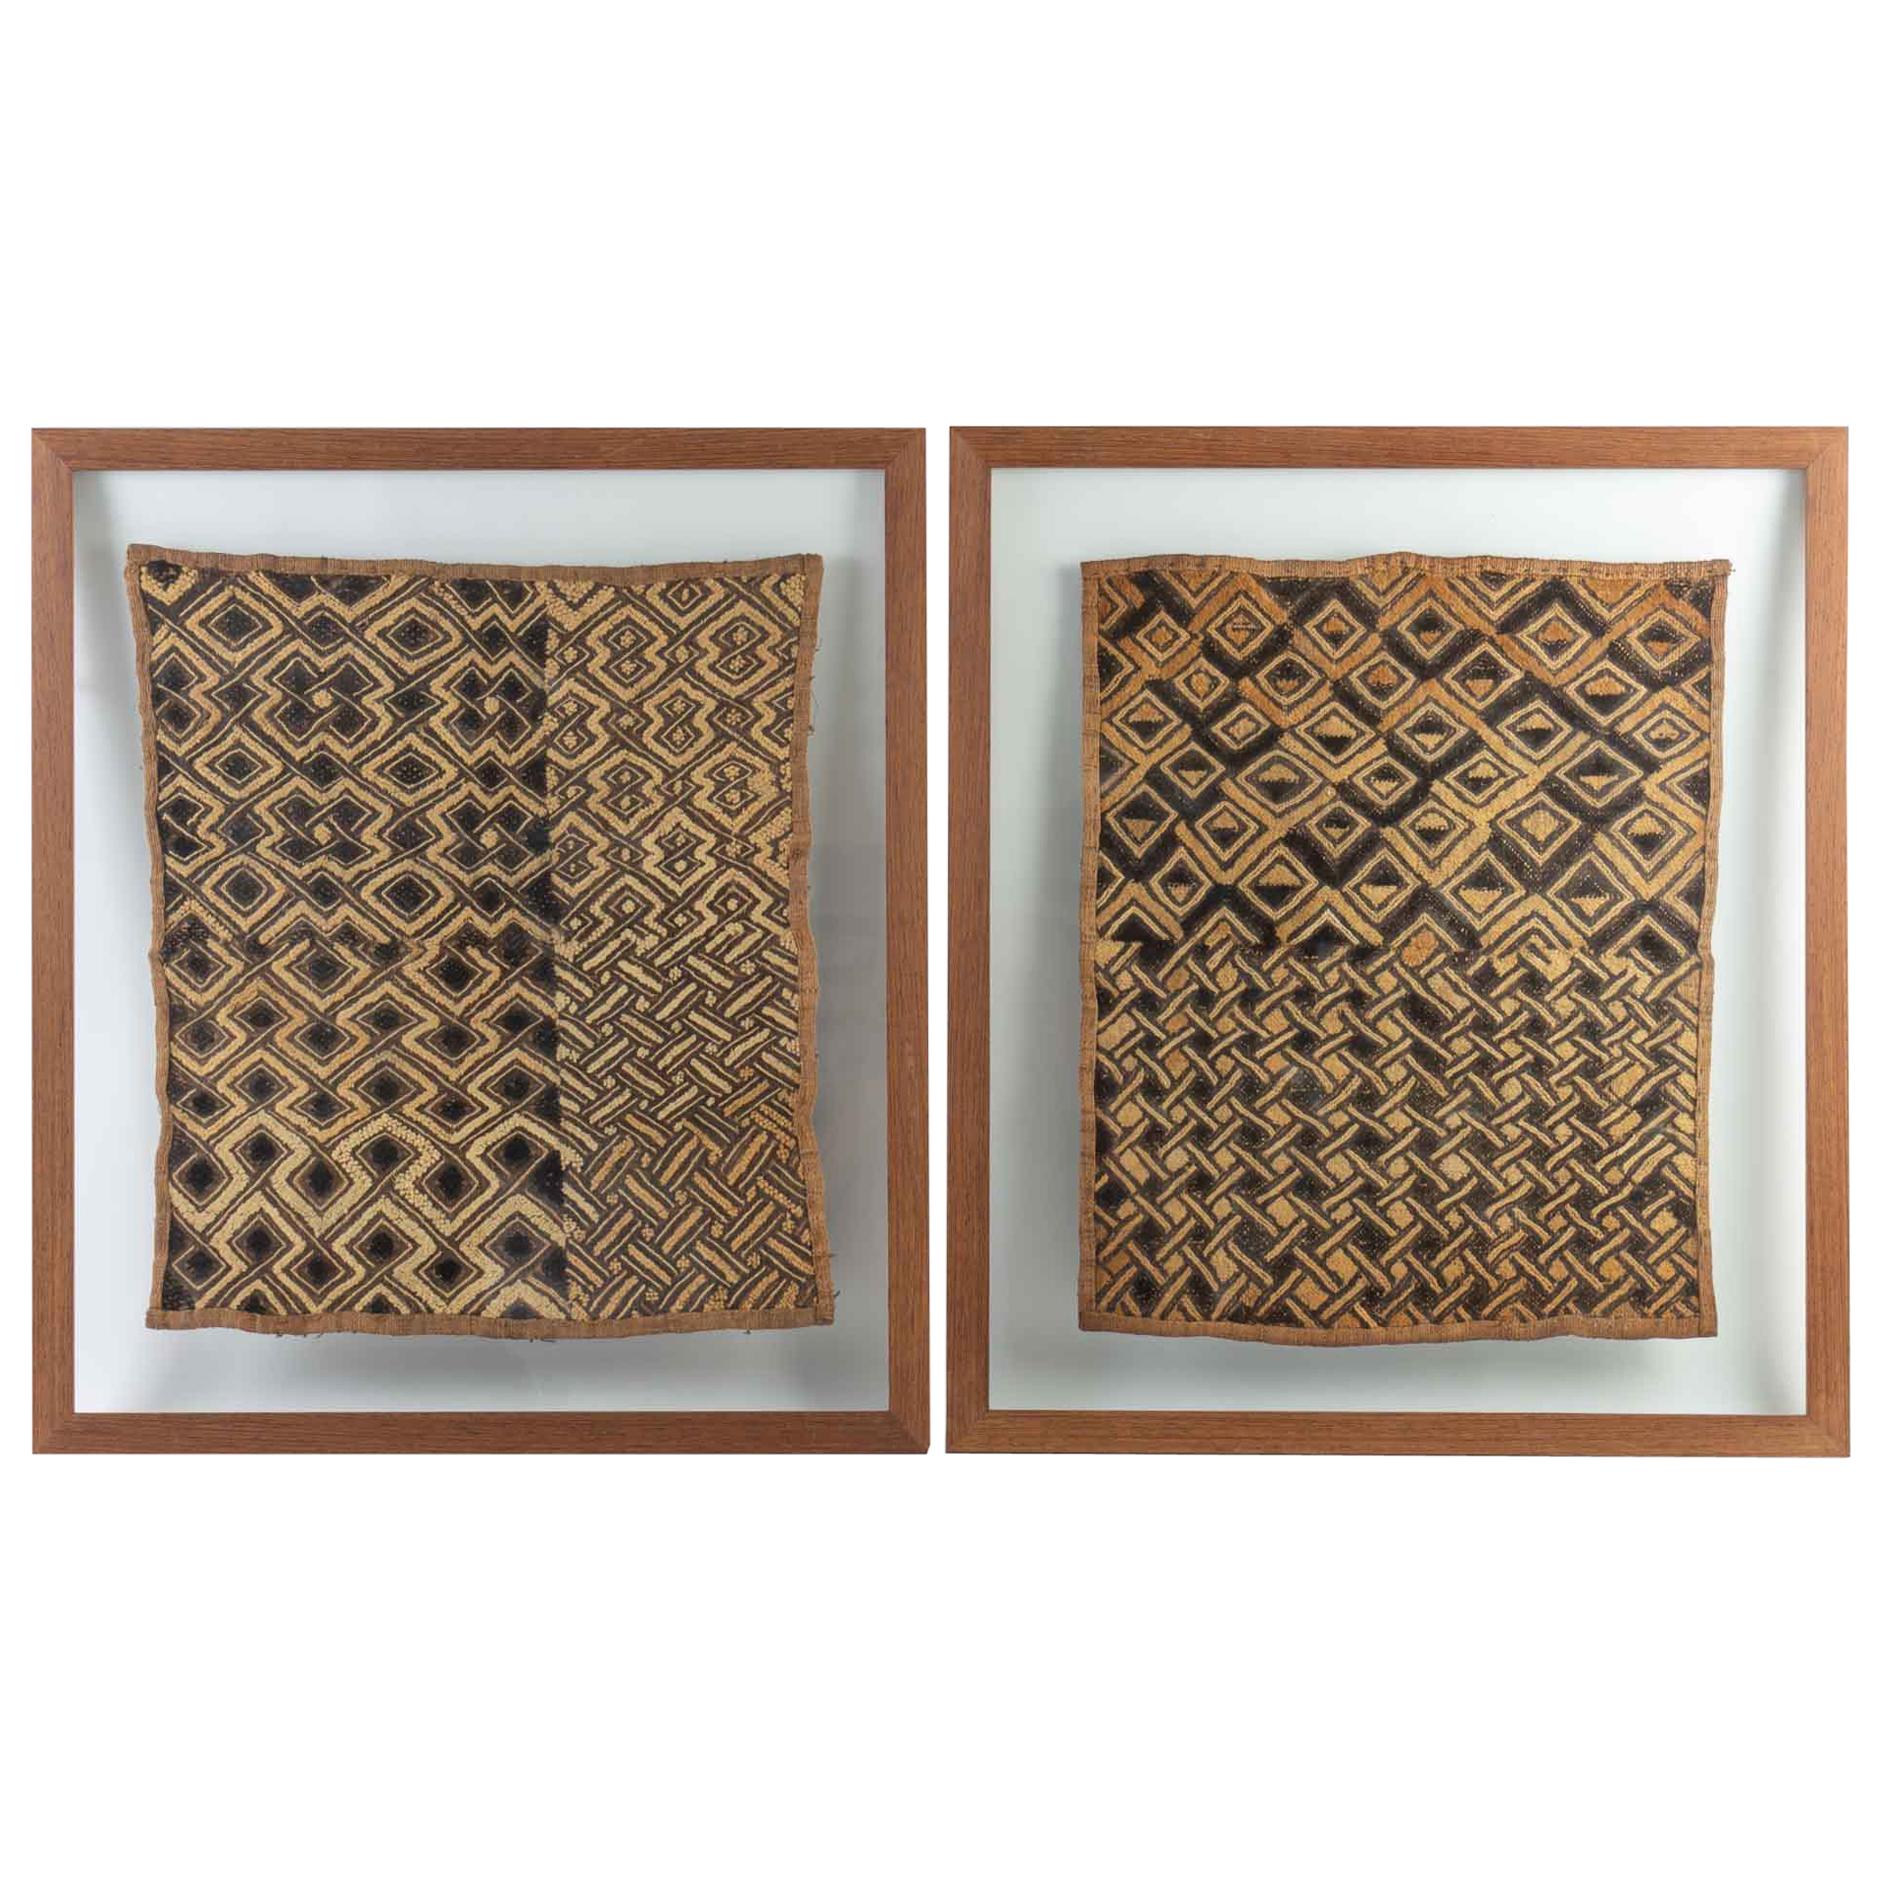 Pair of Framed African Fabrics, Early 20th Century